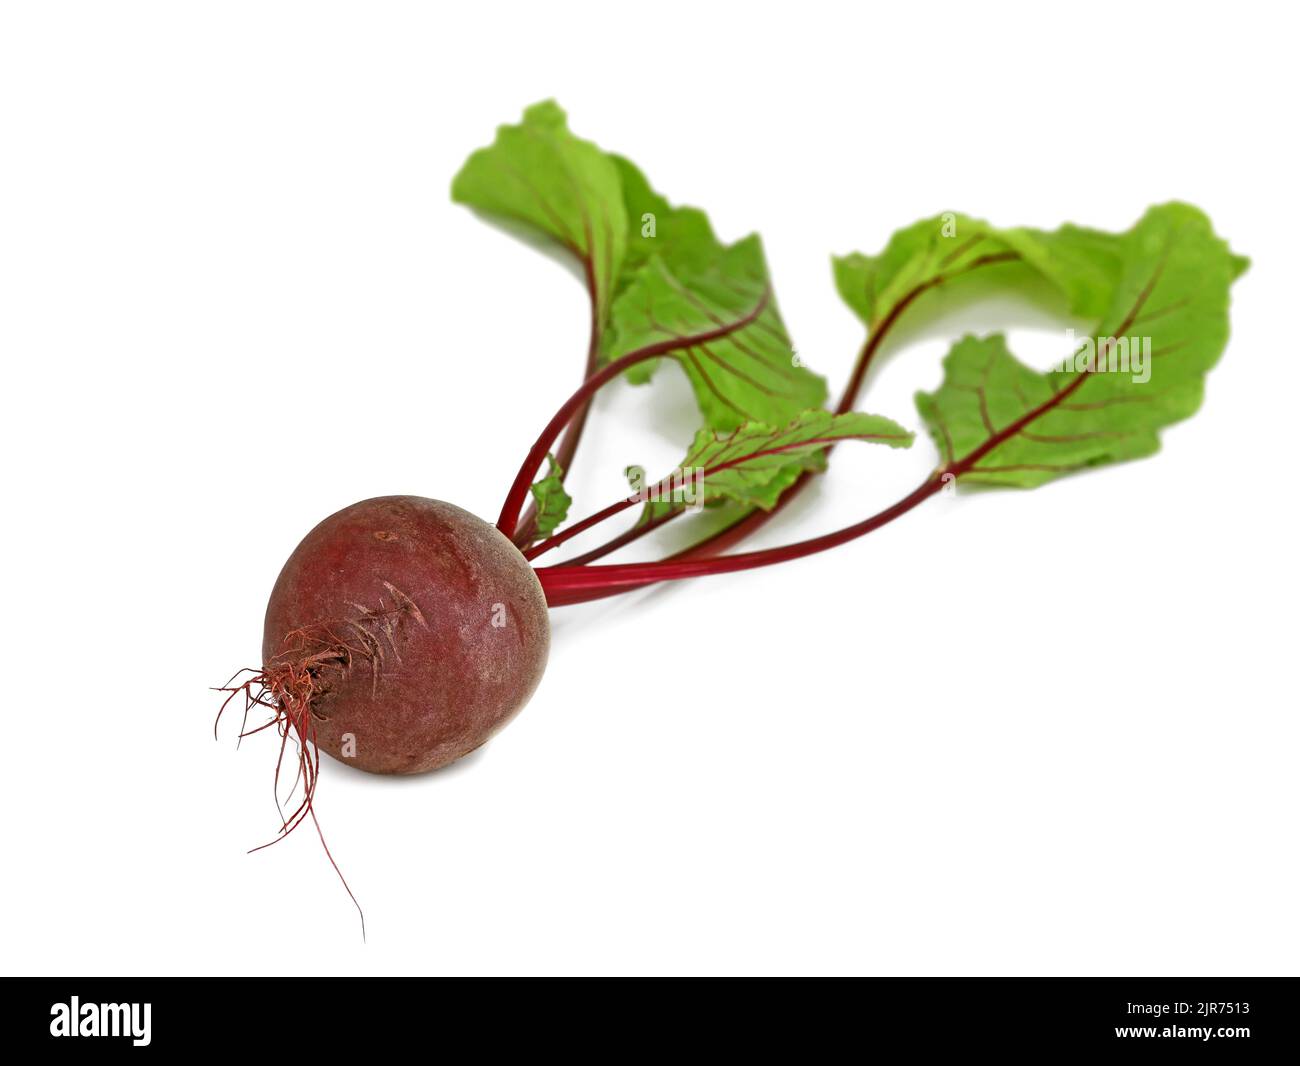 Beetroot with leaves isolated on white background Stock Photo